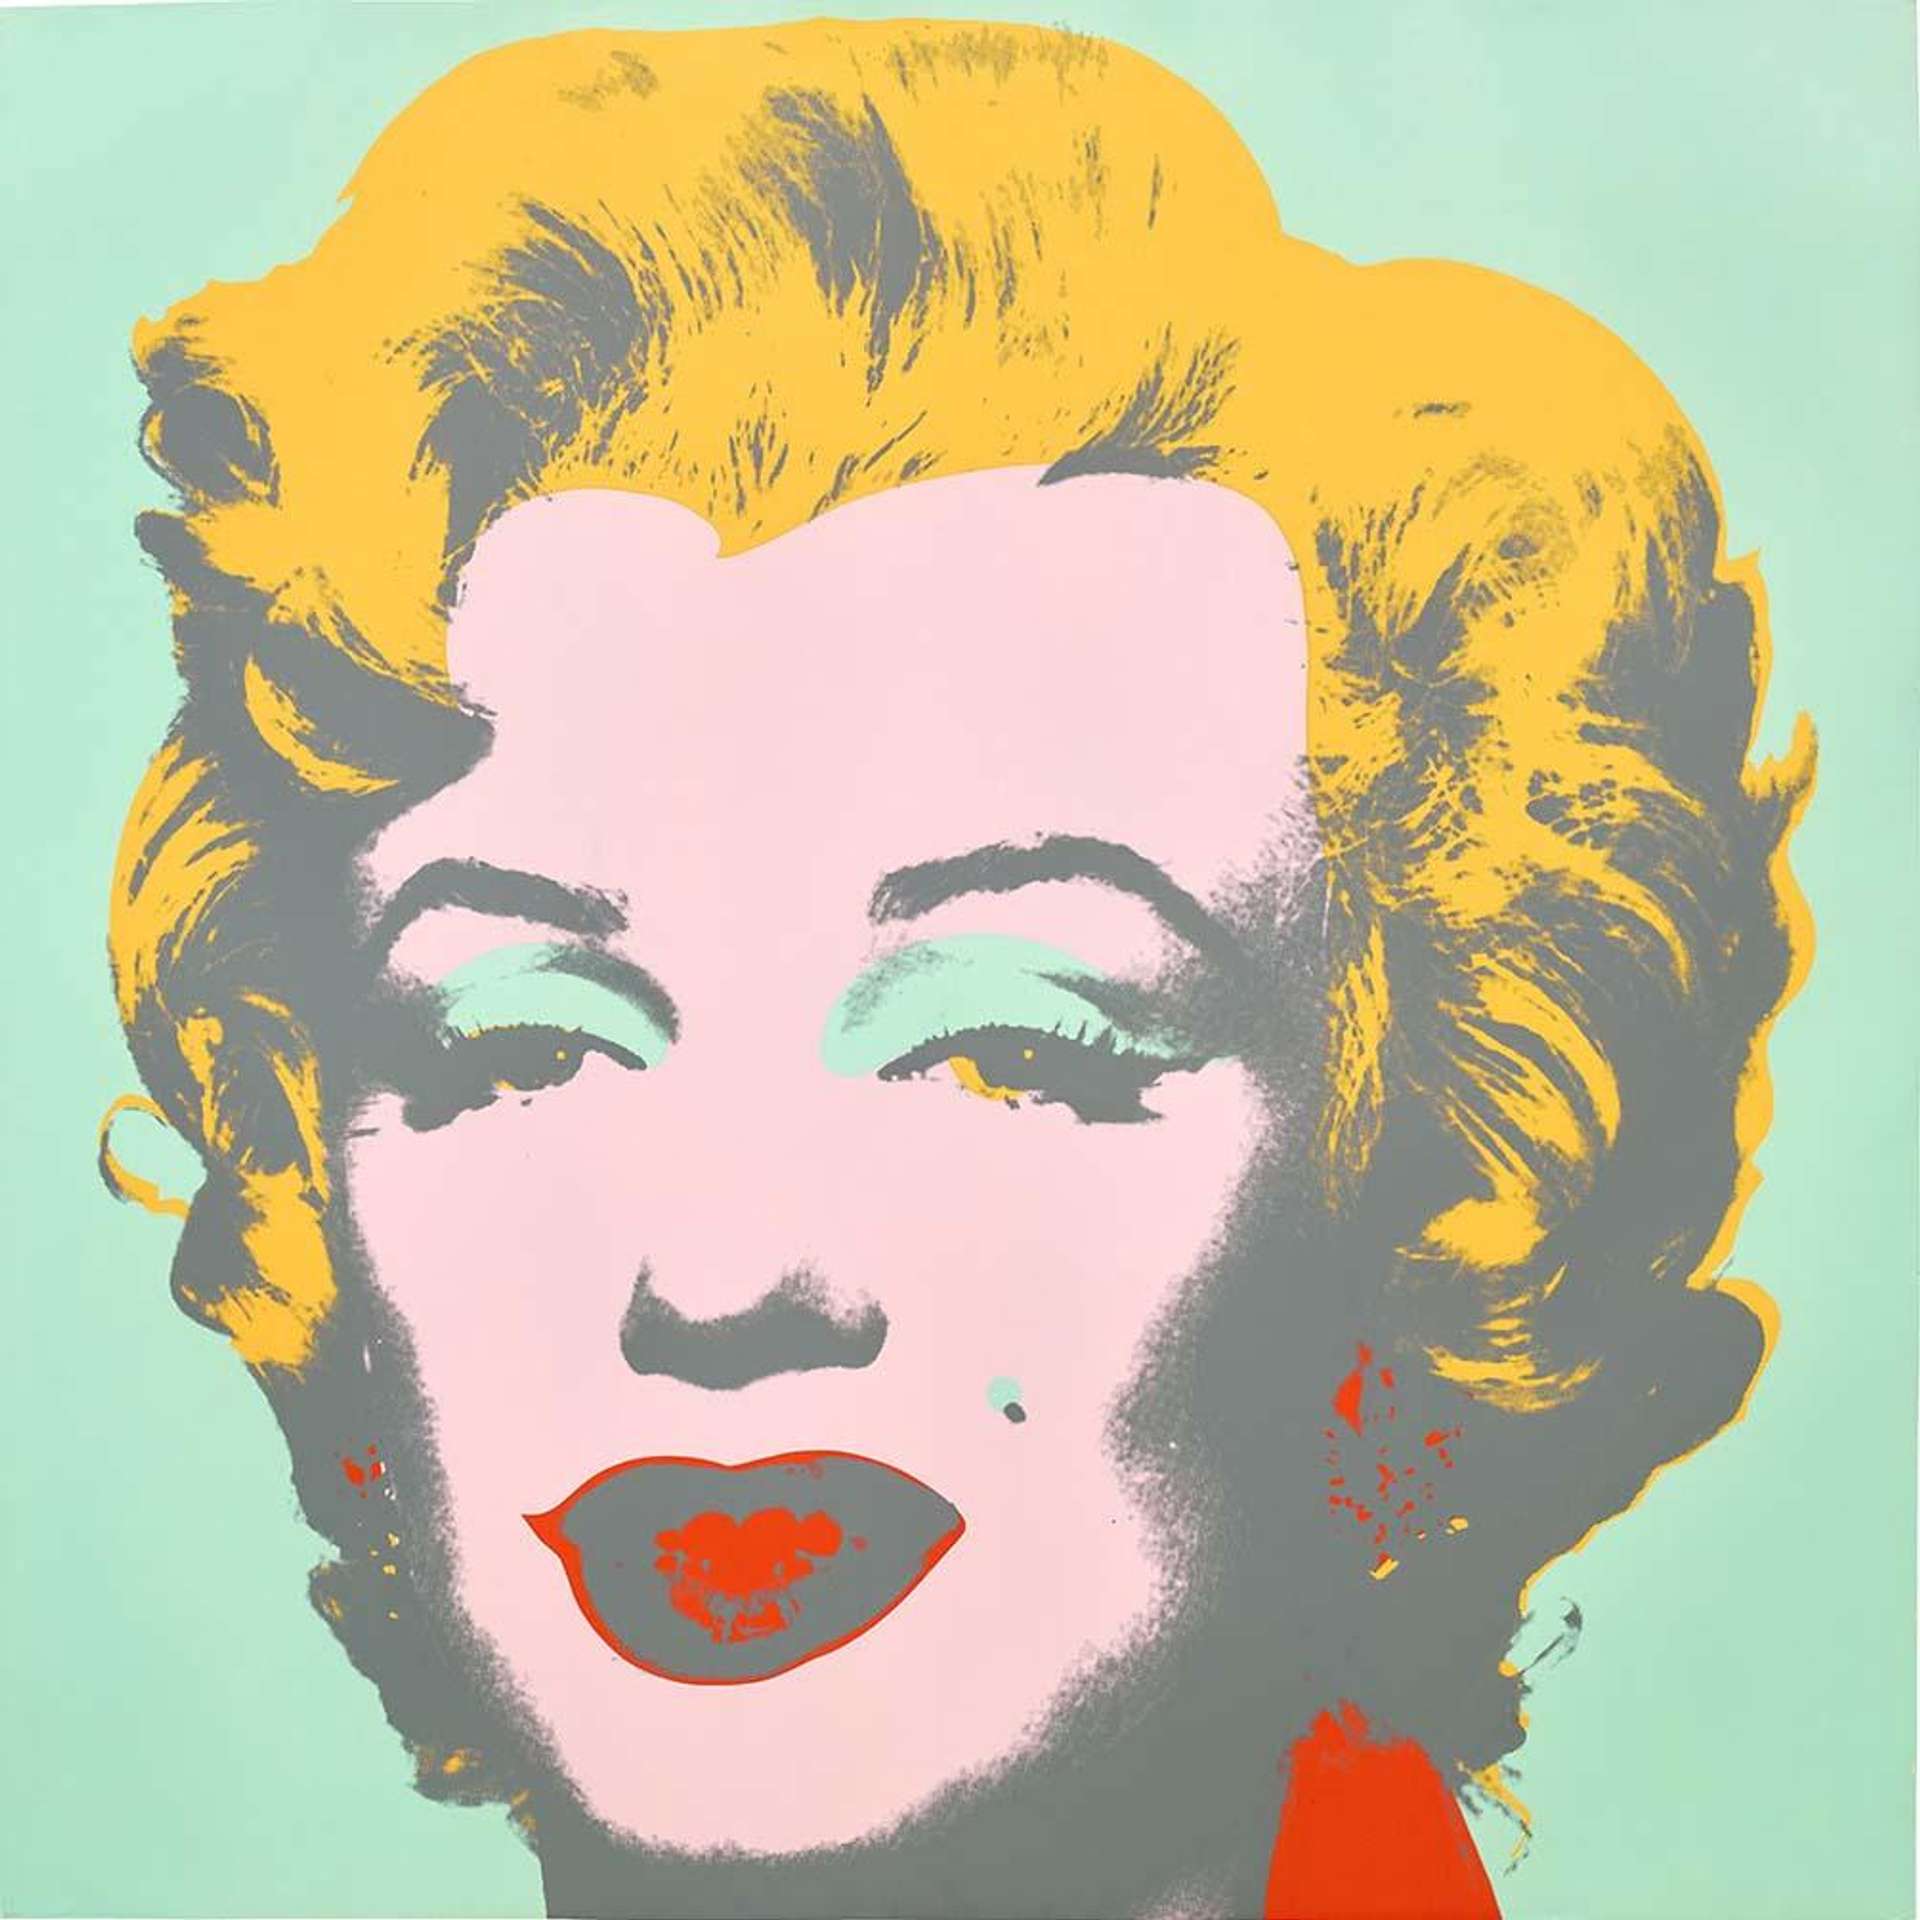 A screenprint by Andy Warhol depicting the portrait of Marilyn Monroe with blonde hair and red lips, set against a mint green bakcground.